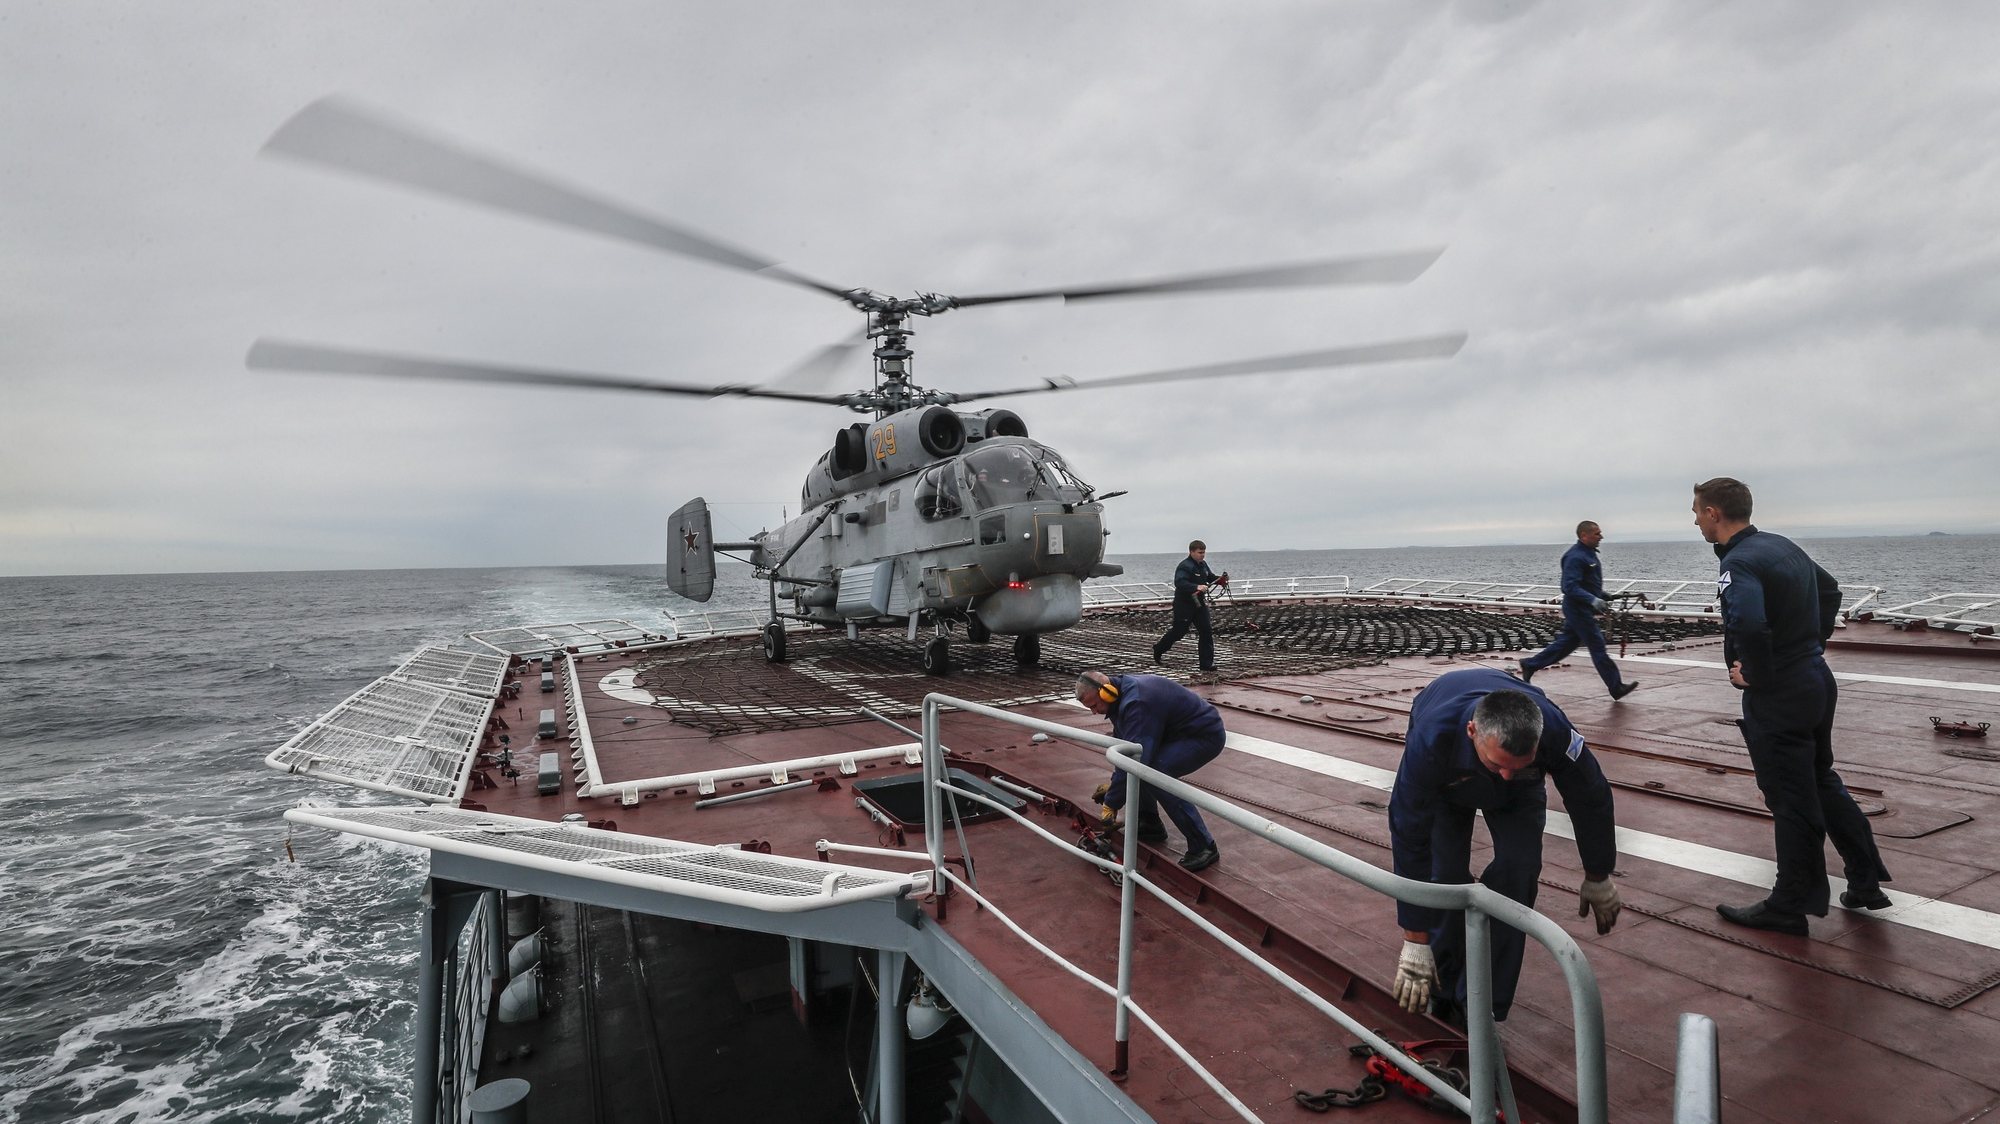 epa10161694 Russian Navy sailors prepare a helicopter for take off on the large anti-submarine ship Marshal Shaposhnikov during the Vostok 2022 strategic command and staff exercise in the Peter the Great Gulf of the Sea of Japan, near Vladivostok, Russia, 05 September 2022. The Vostok 2022 strategic command and staff exercise will take place from 01 to 07 September 2022 and will involve over 50,000 servicemen and more than 5,000 units of weapons and military equipment.  EPA/YURI KOCHETKOV